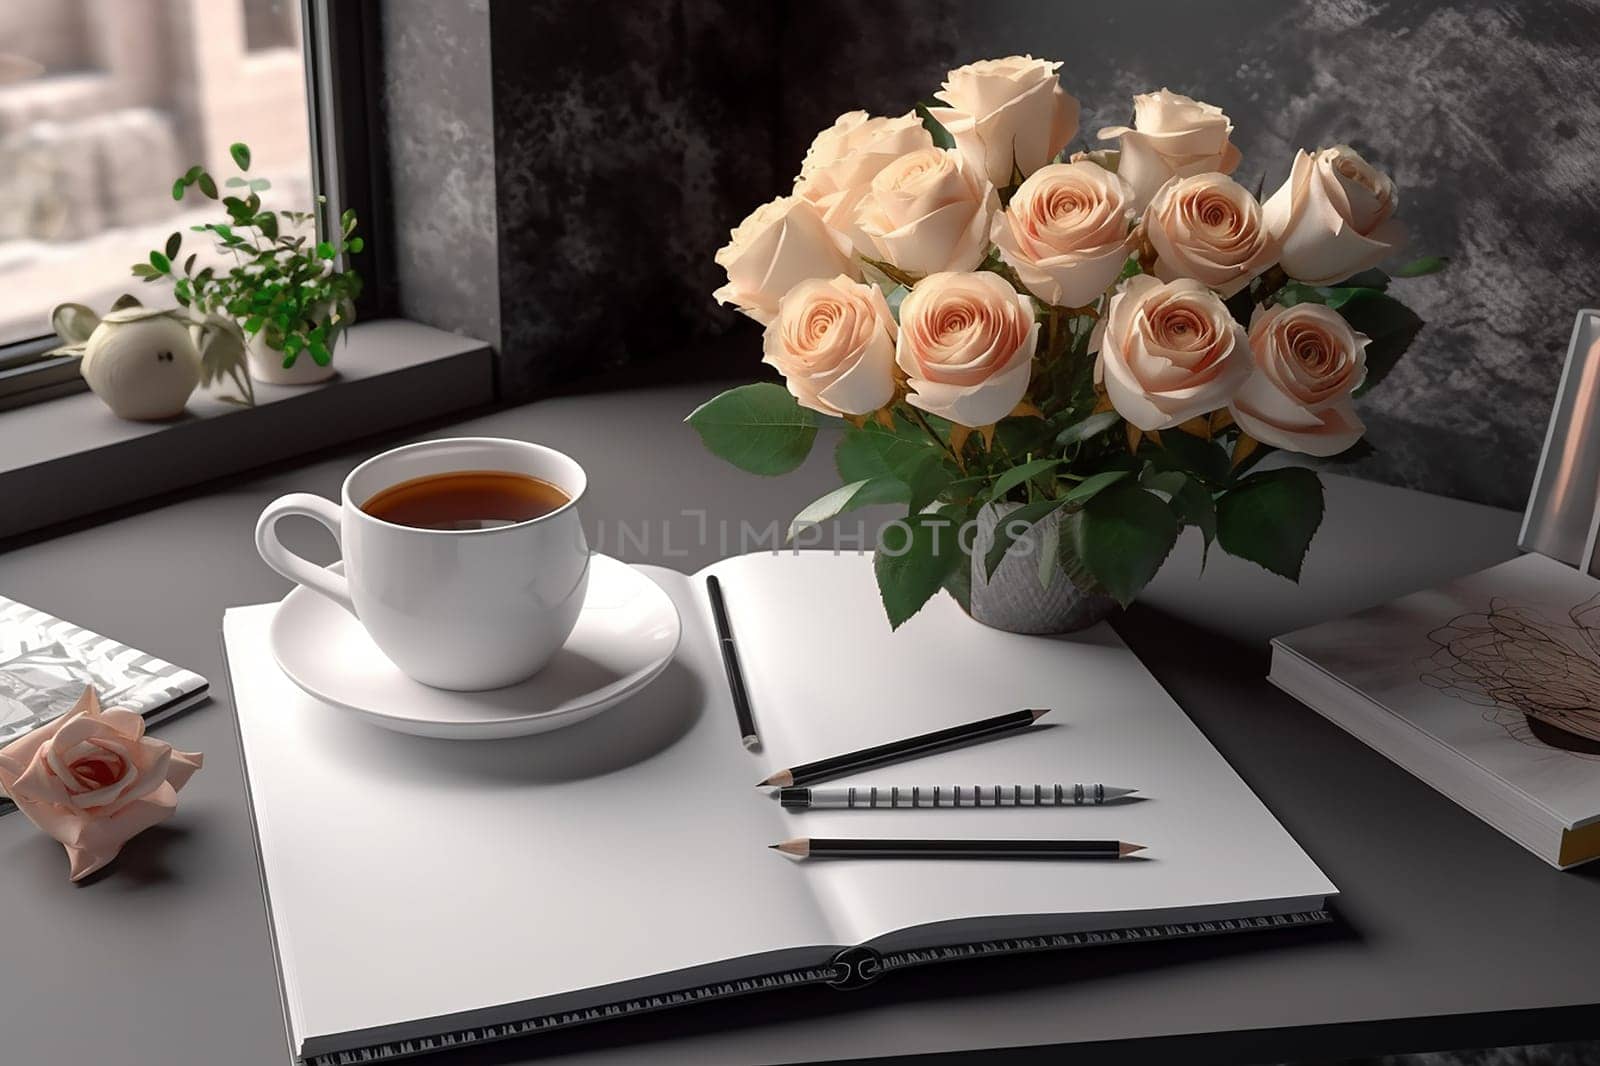 A serene workspace with roses, tea, and a sketchbook